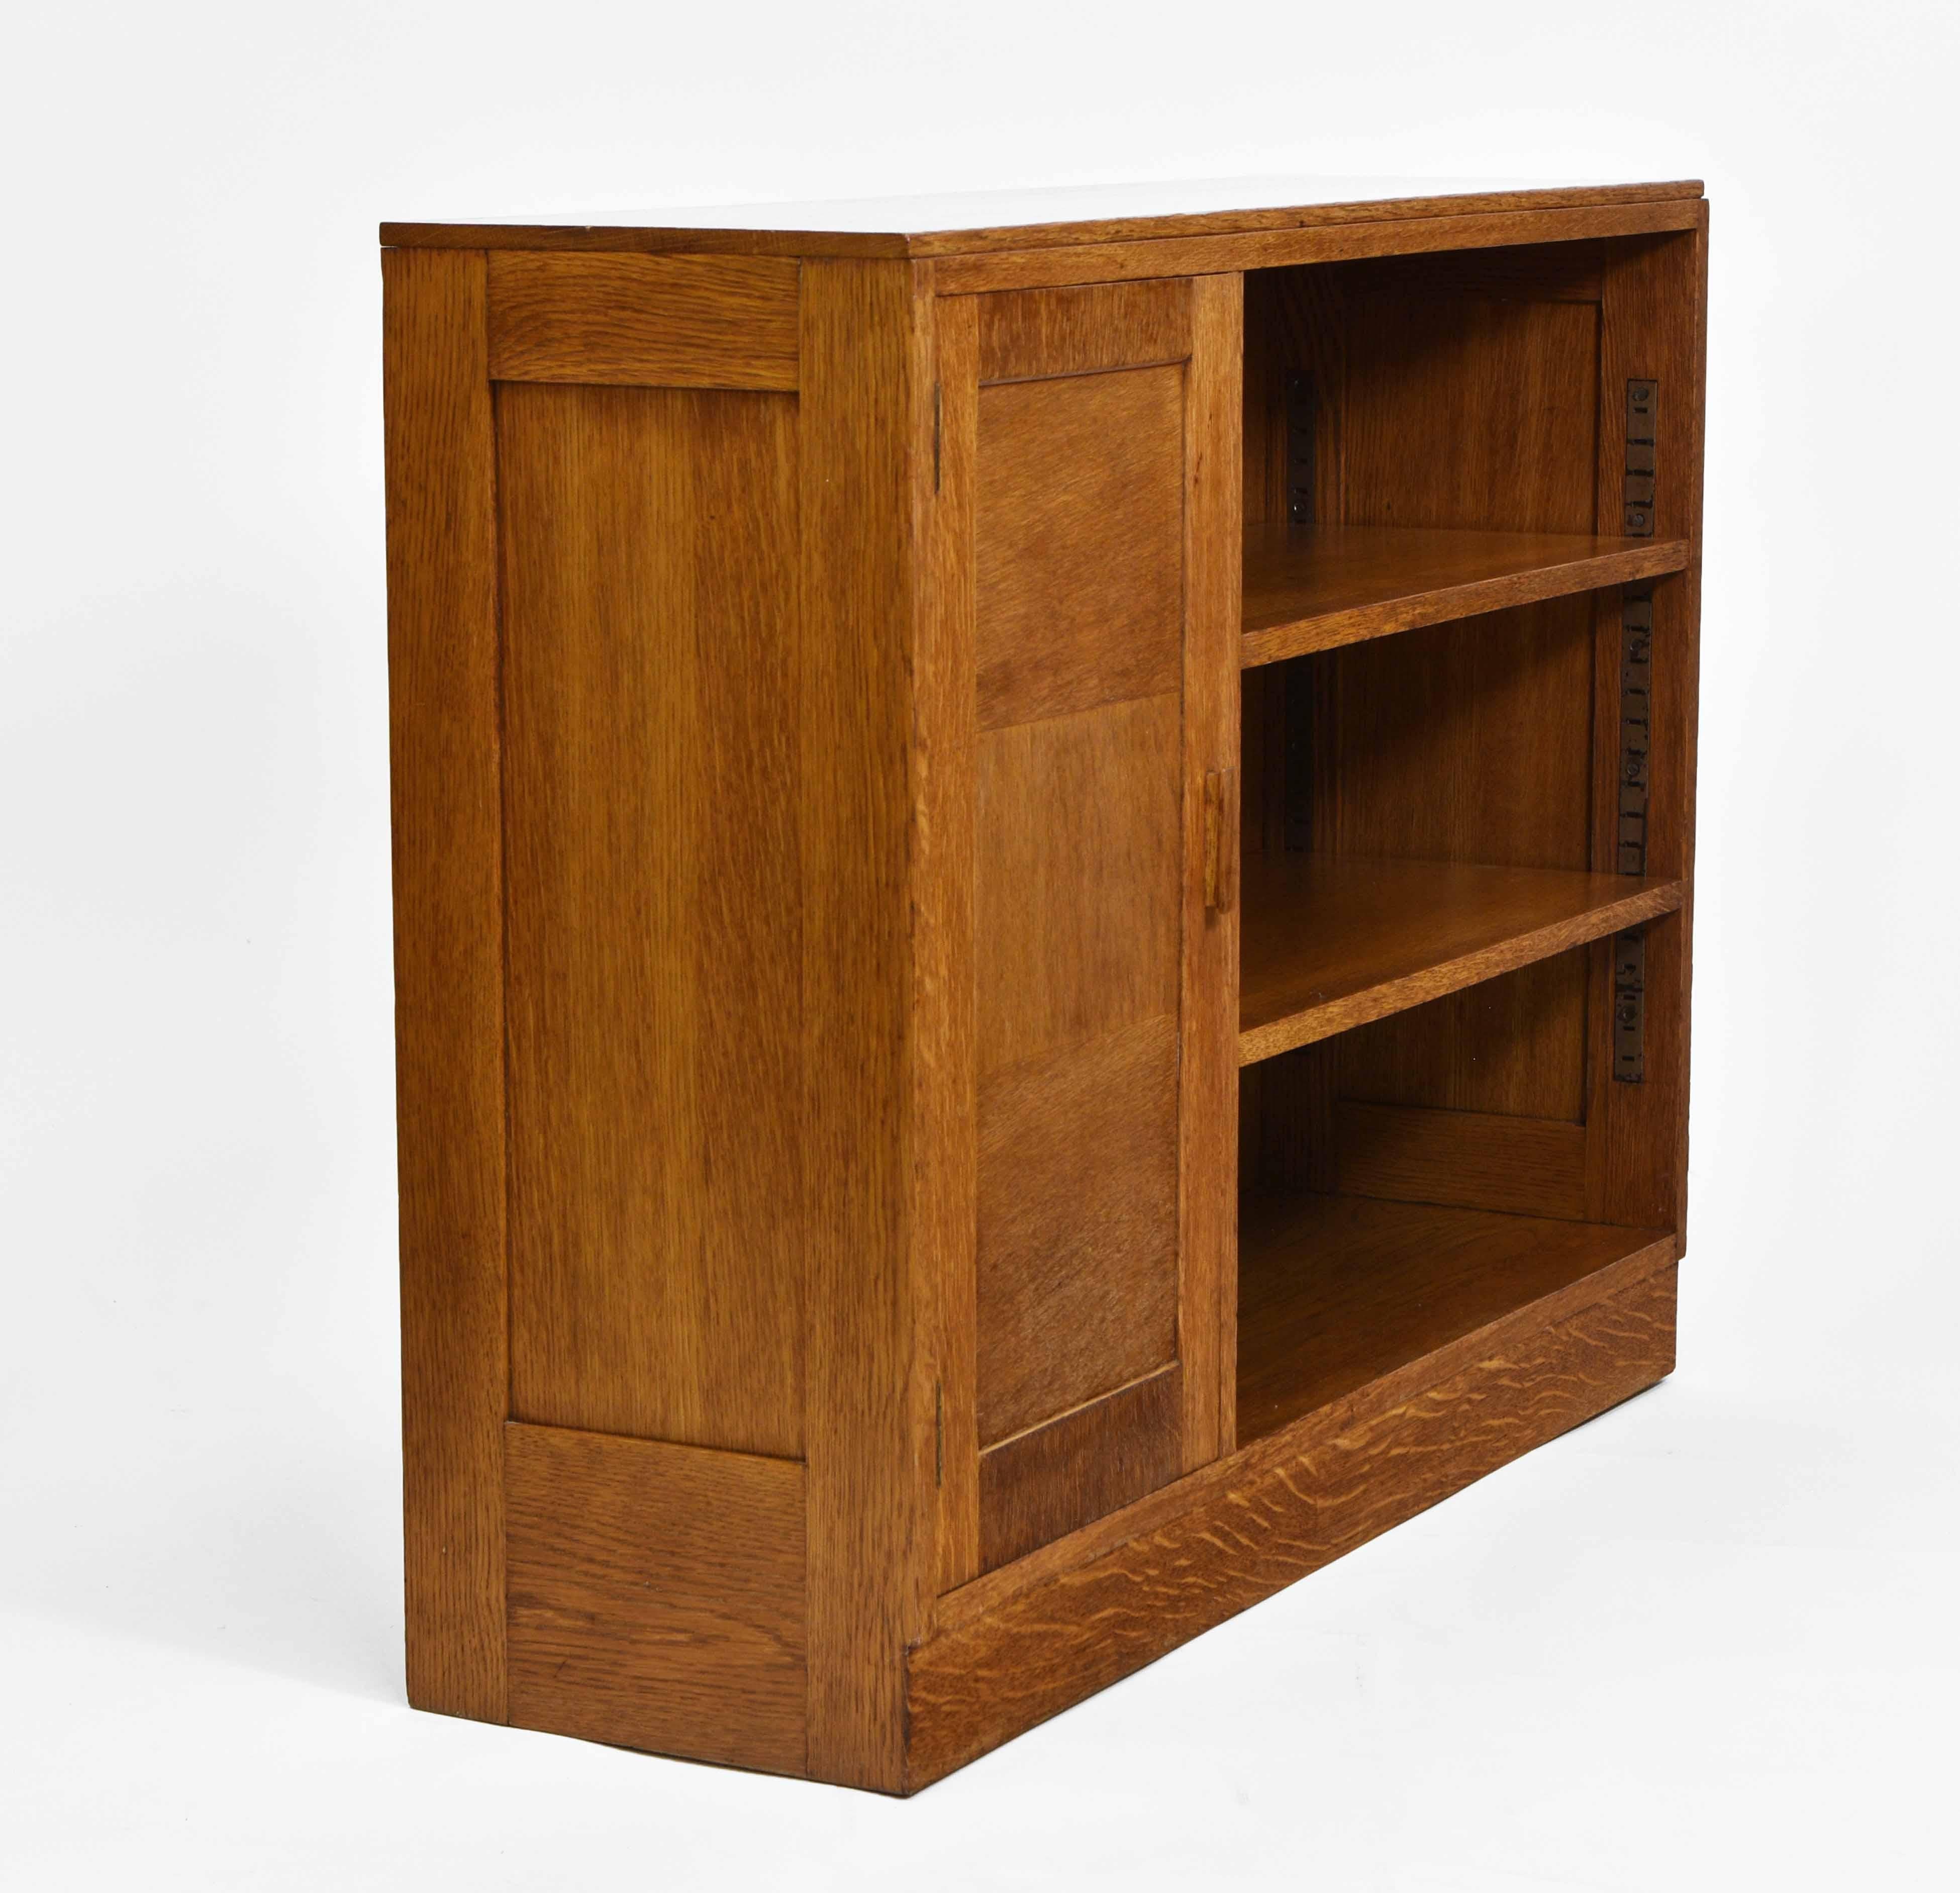 An English Art Deco period oak small open bookcase/cabinet. Retailer's label: Bowman Bros, Camden Town, London. Maker's label: Good Furniture Units - Circa 1930.

*Free delivery for all areas in mainland England & Wales only. Delivery to room of